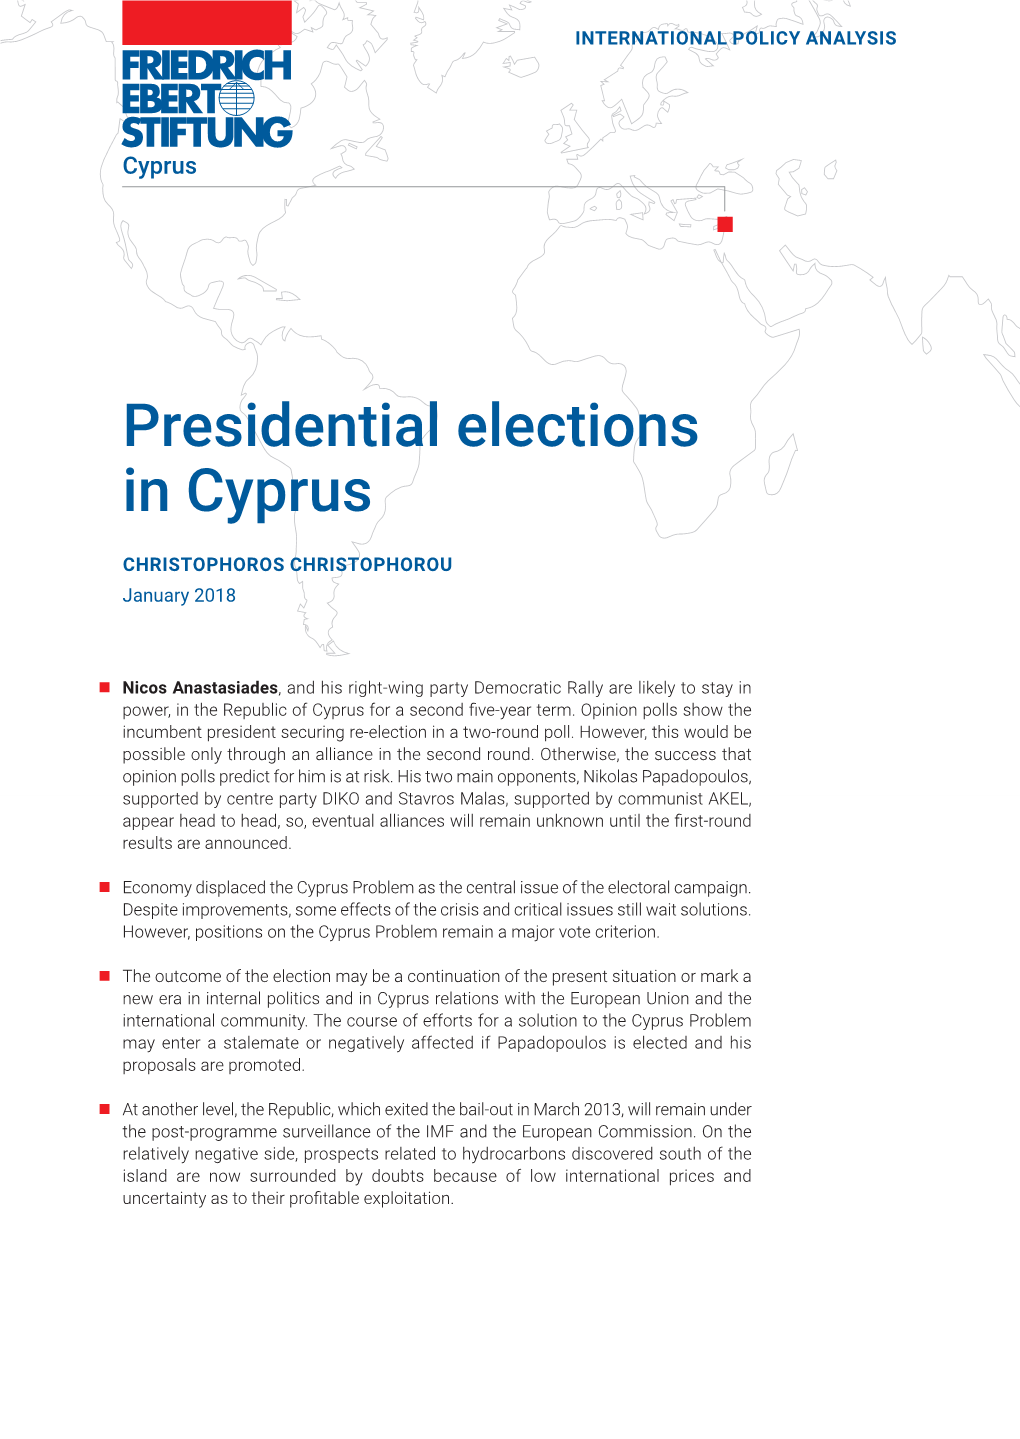 Presidential Elections in Cyprus-2018 New 24/01/2018 11:12 Π.Μ